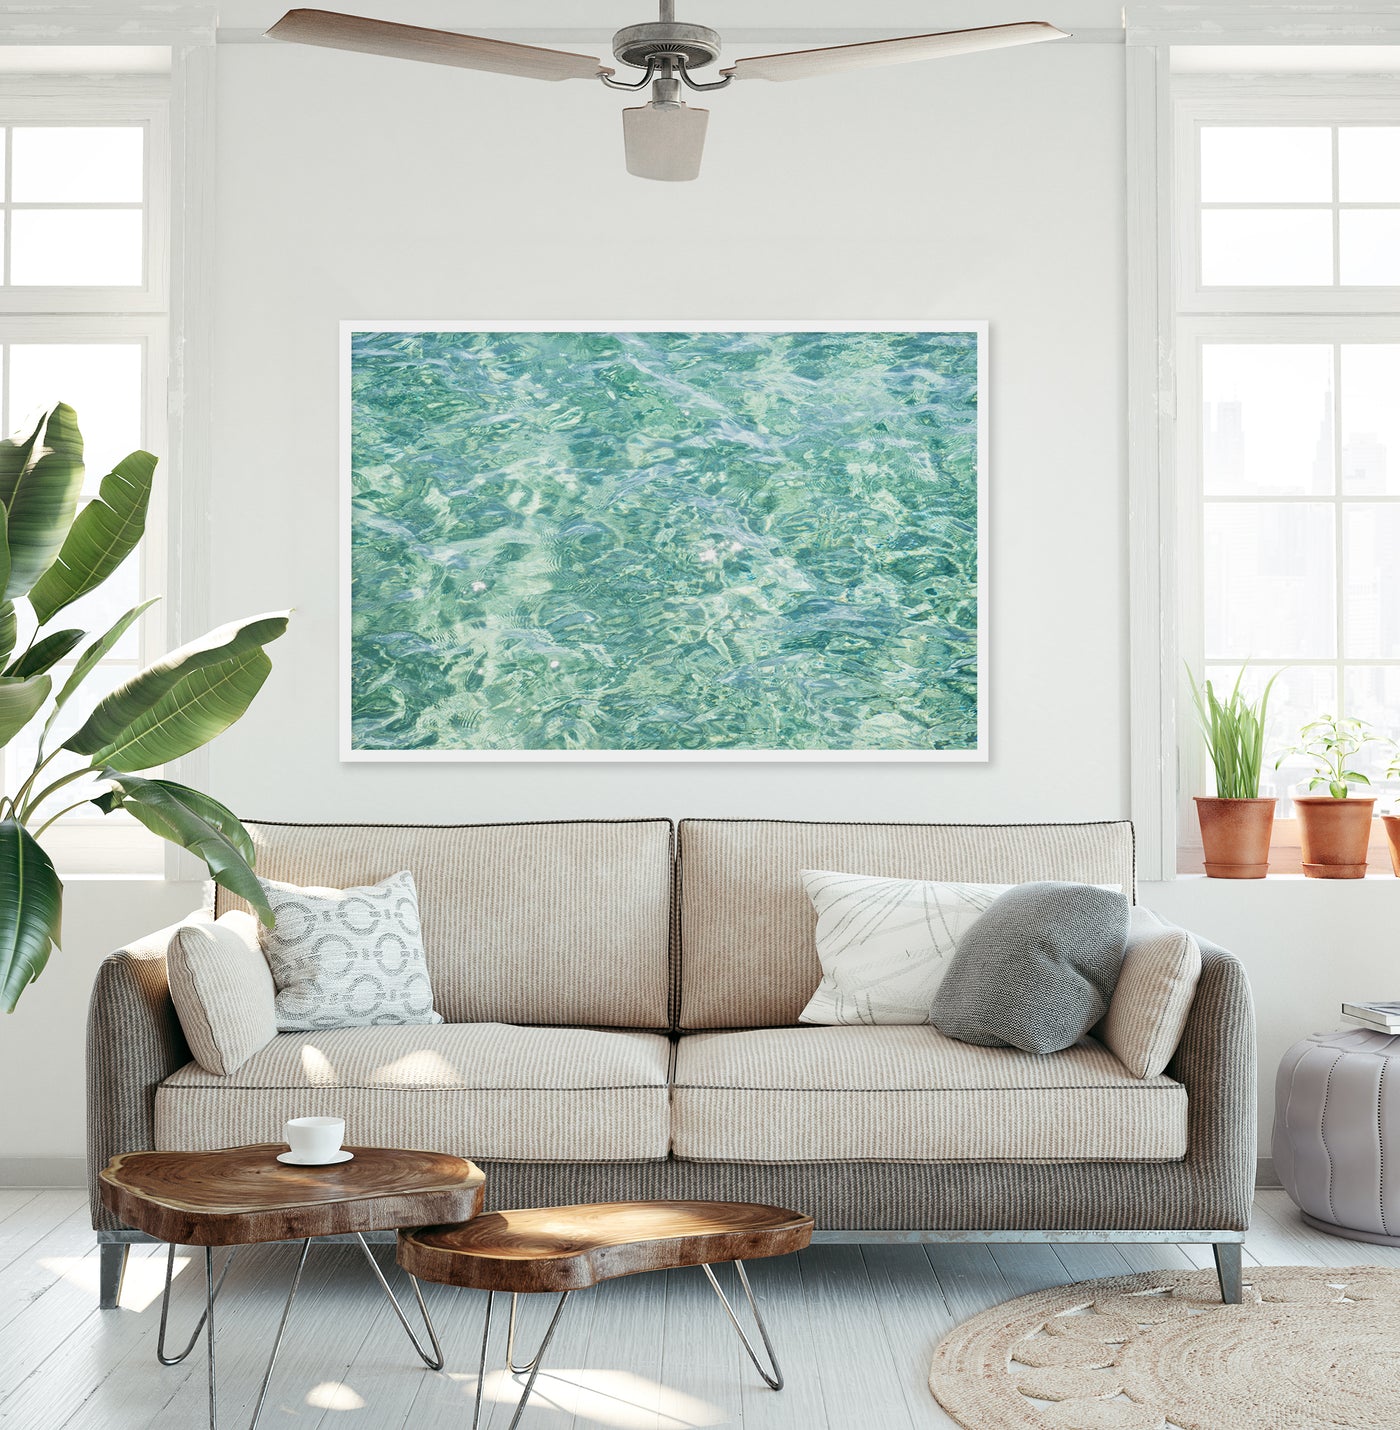 Abstract Water No 9 - Large abstract art print by Cattie Coyle Photography above couch in living room